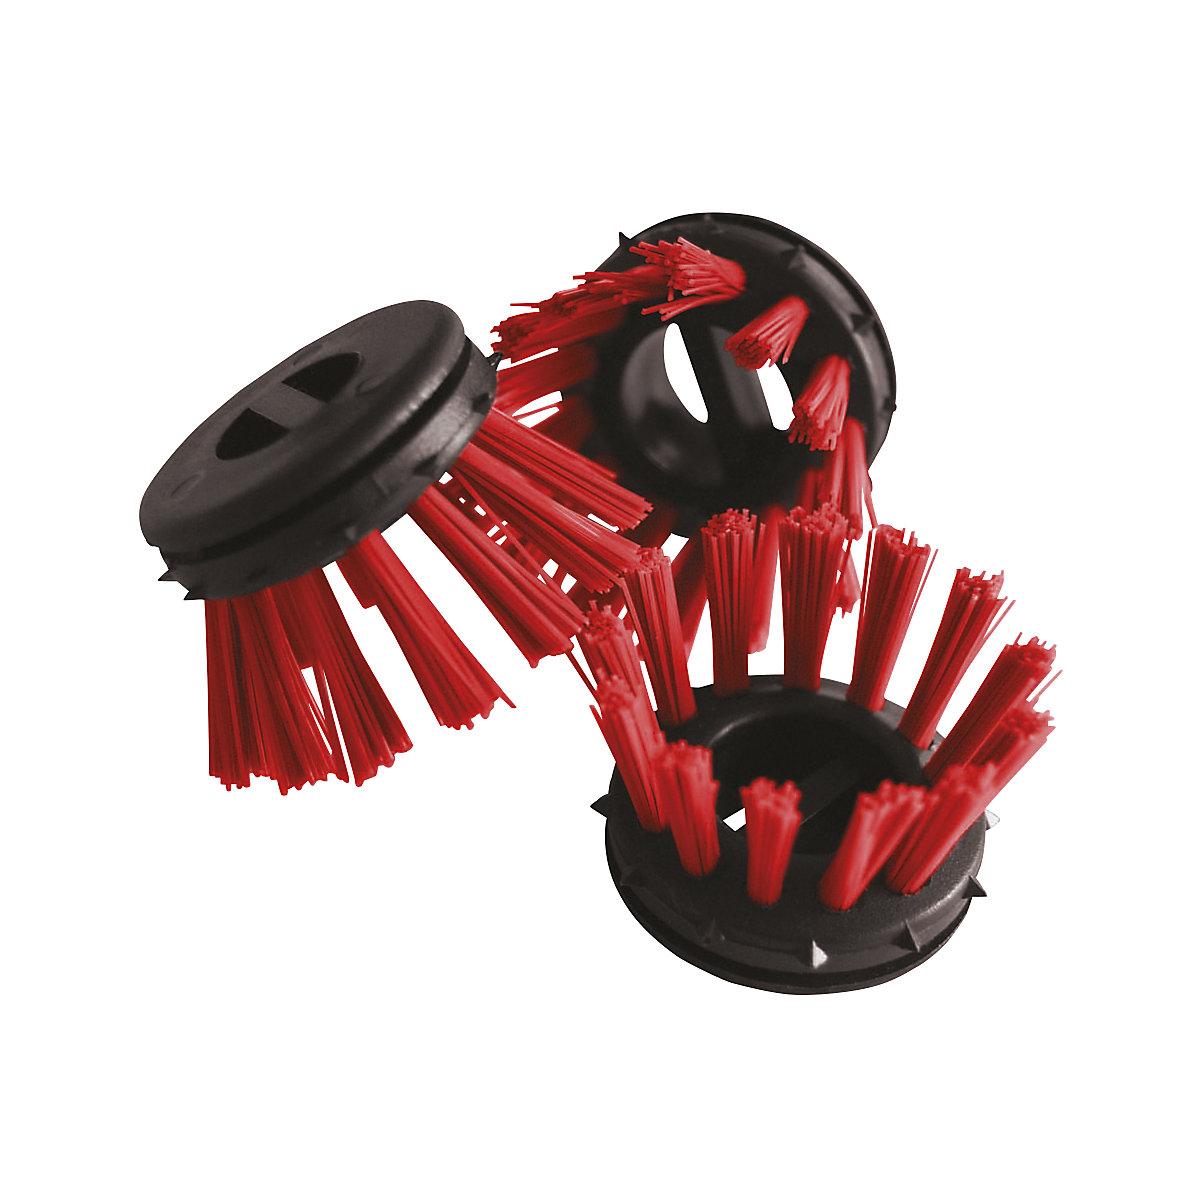 Round brush for ring rubber mats